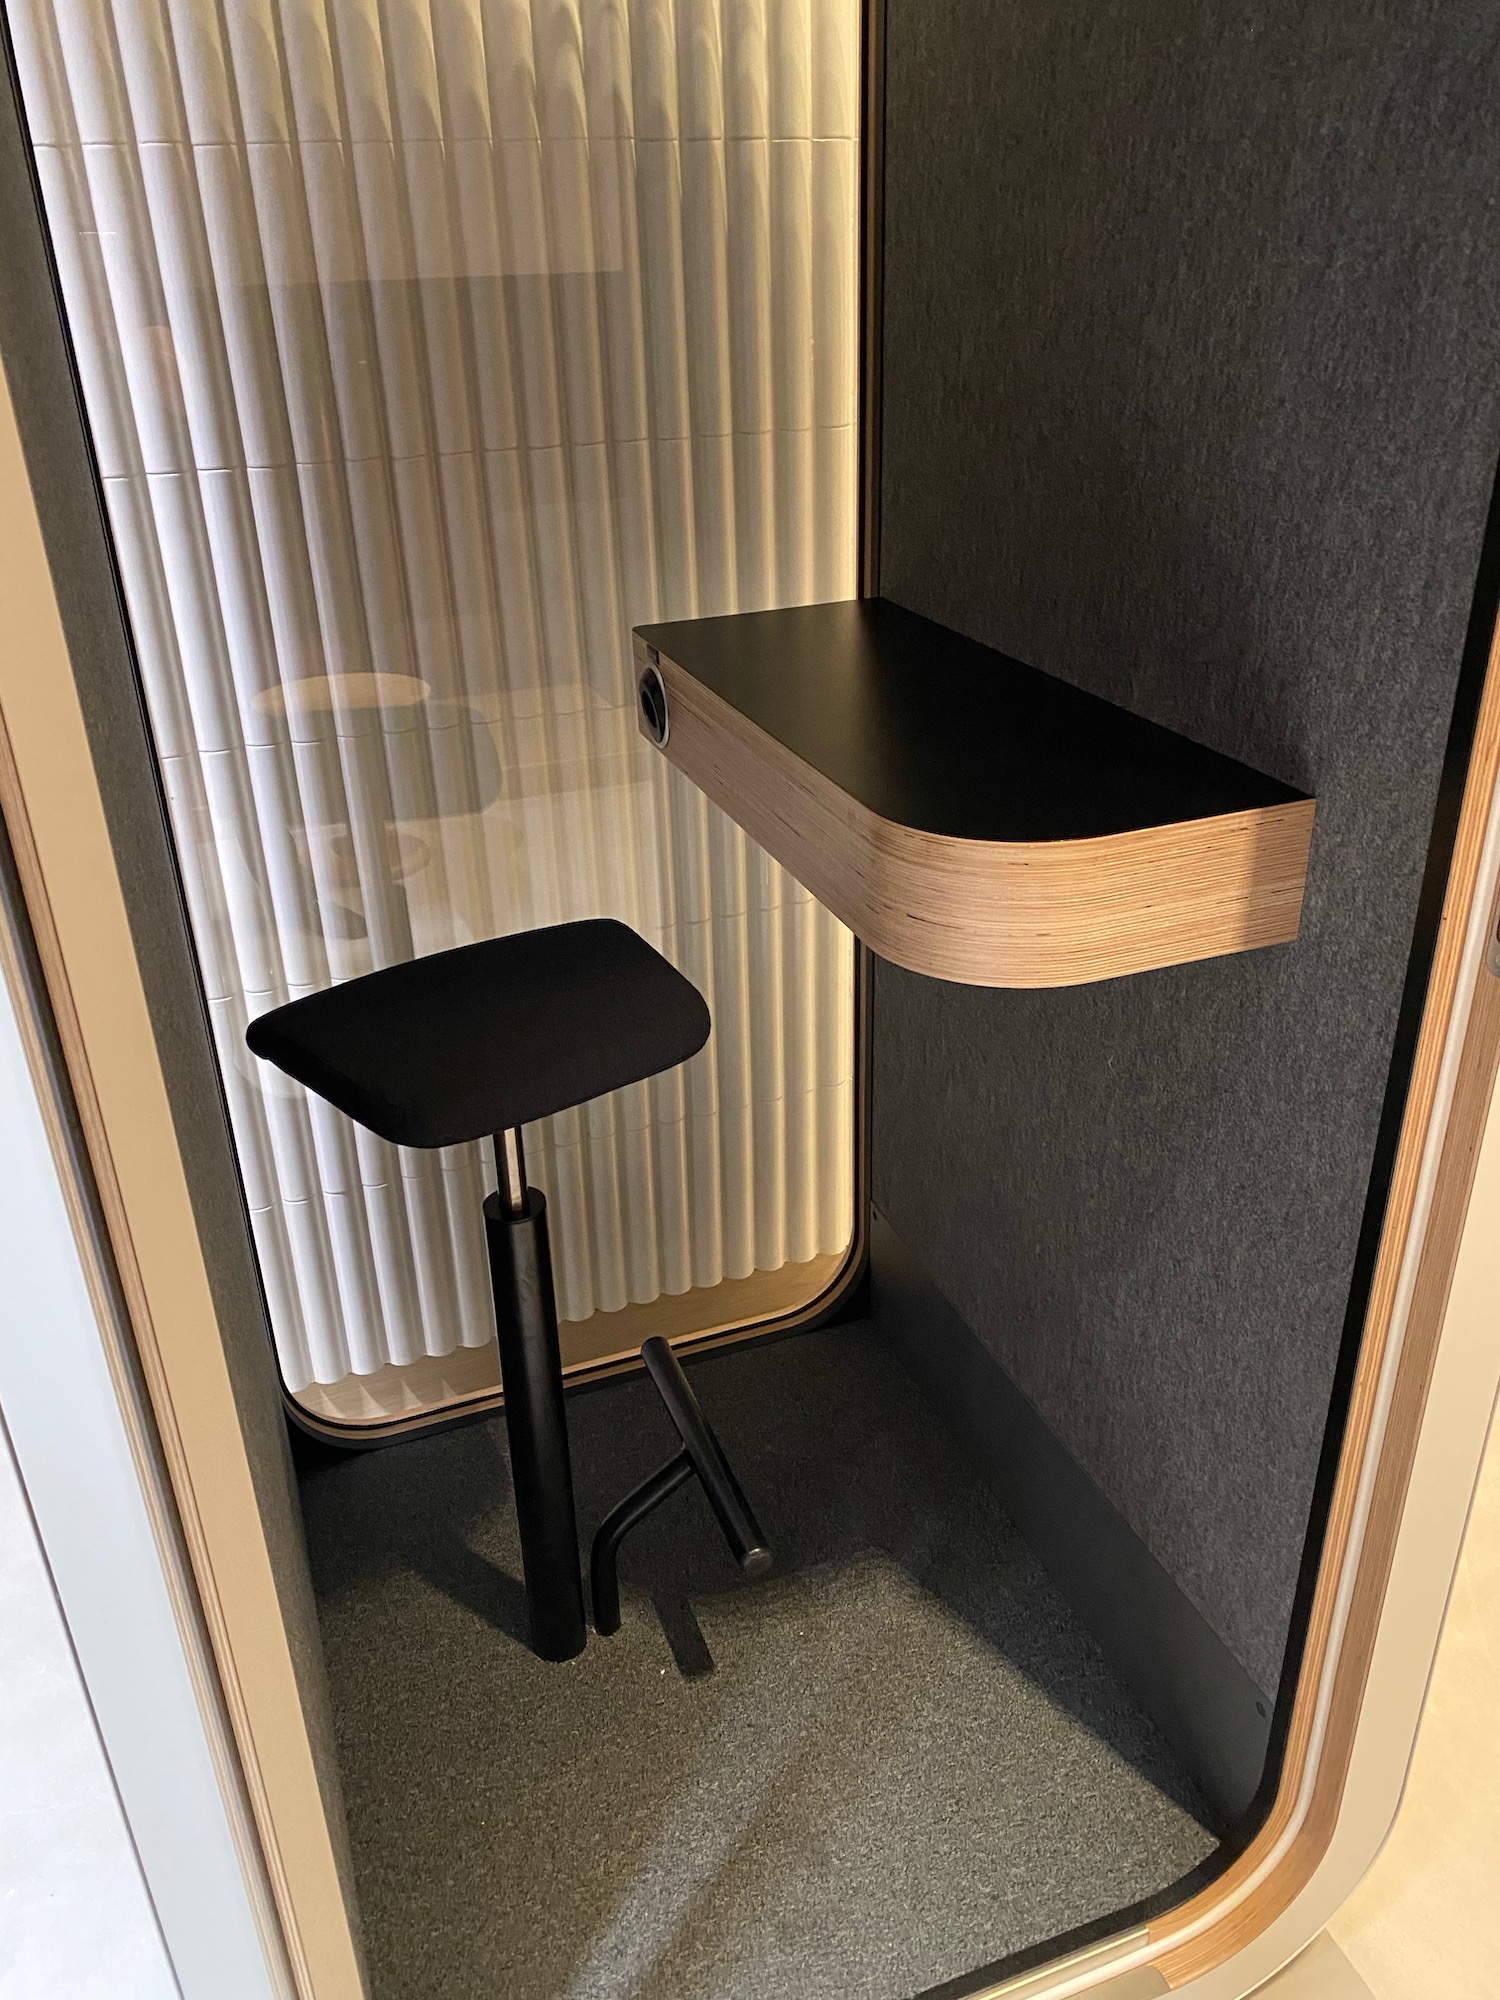 a chair and a shelf in a room